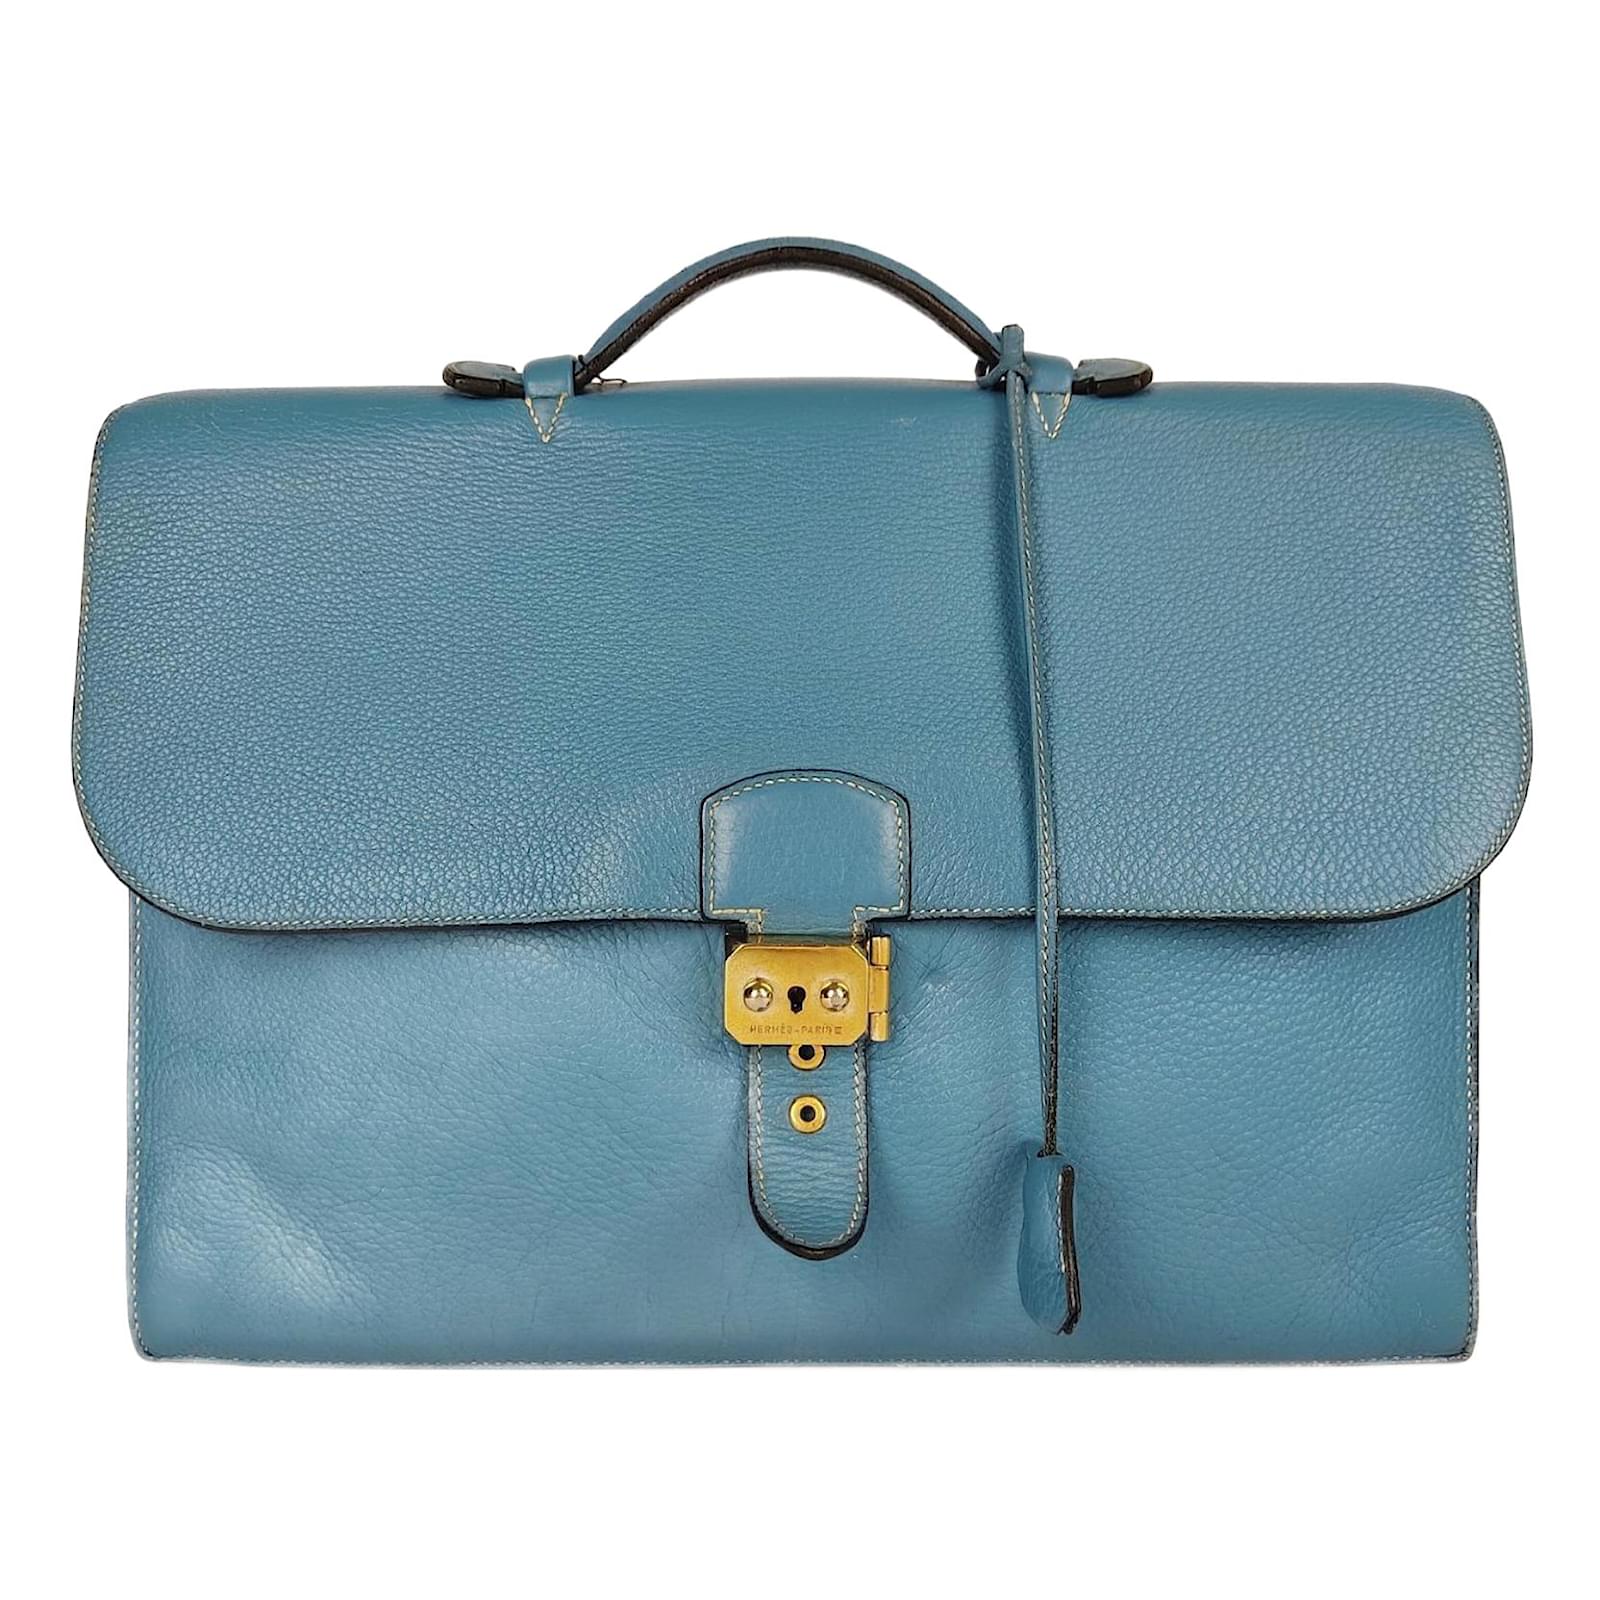 Hermès dépeches work bag in turquoise leather Light blue ref